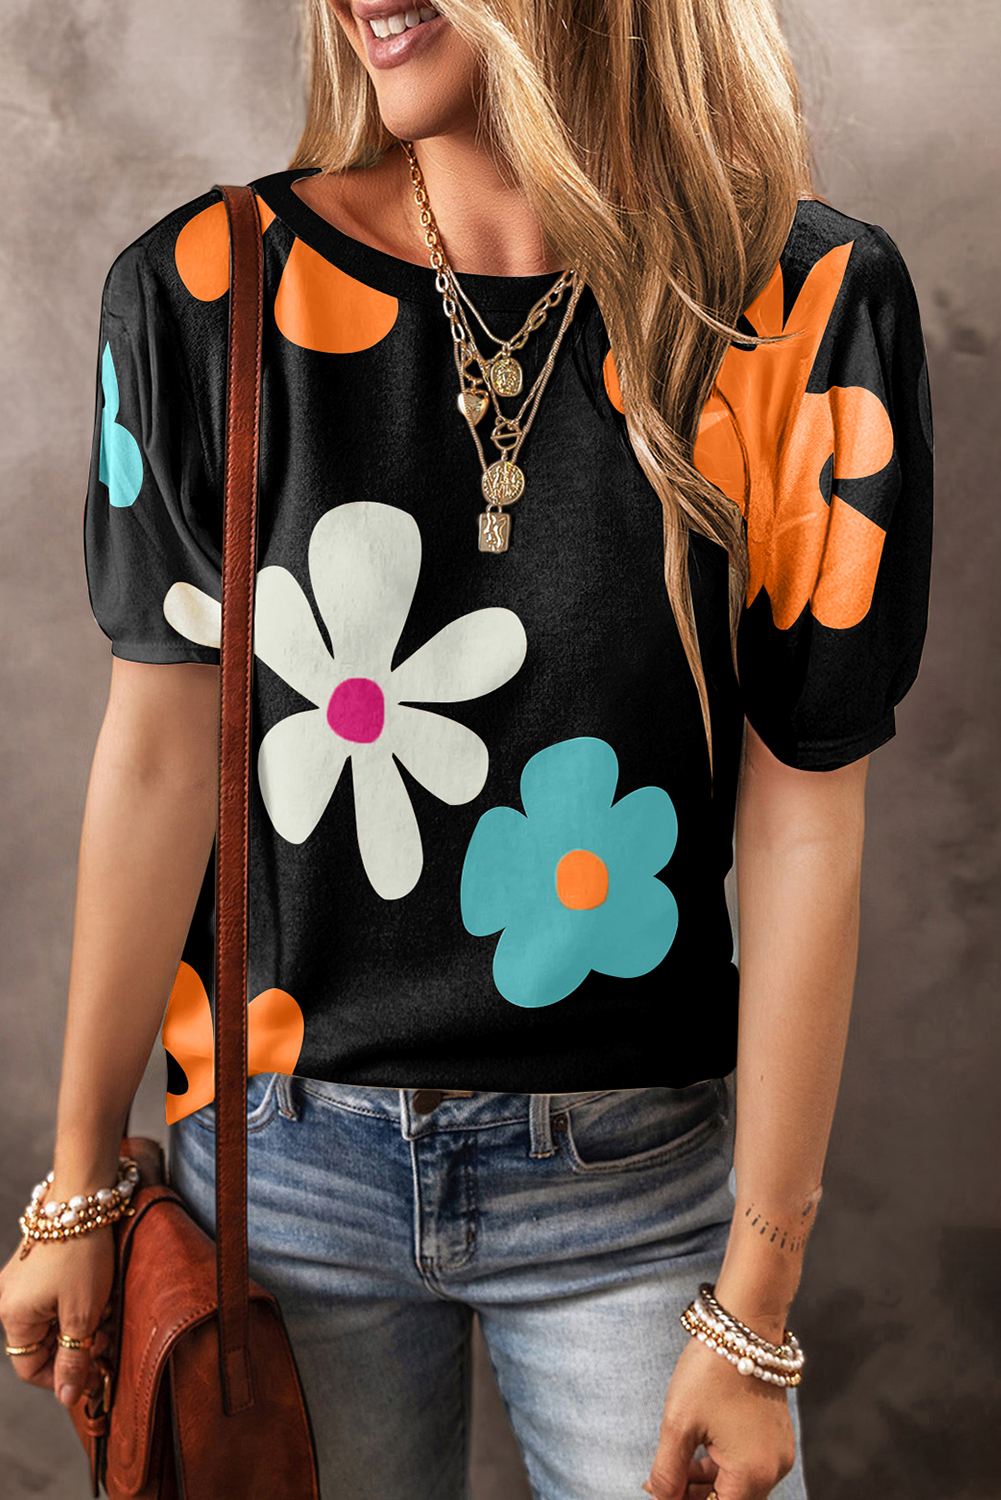 Shewin Wholesale Apparel Black Colorful FLOWER Print Bubble Sleeve Tee